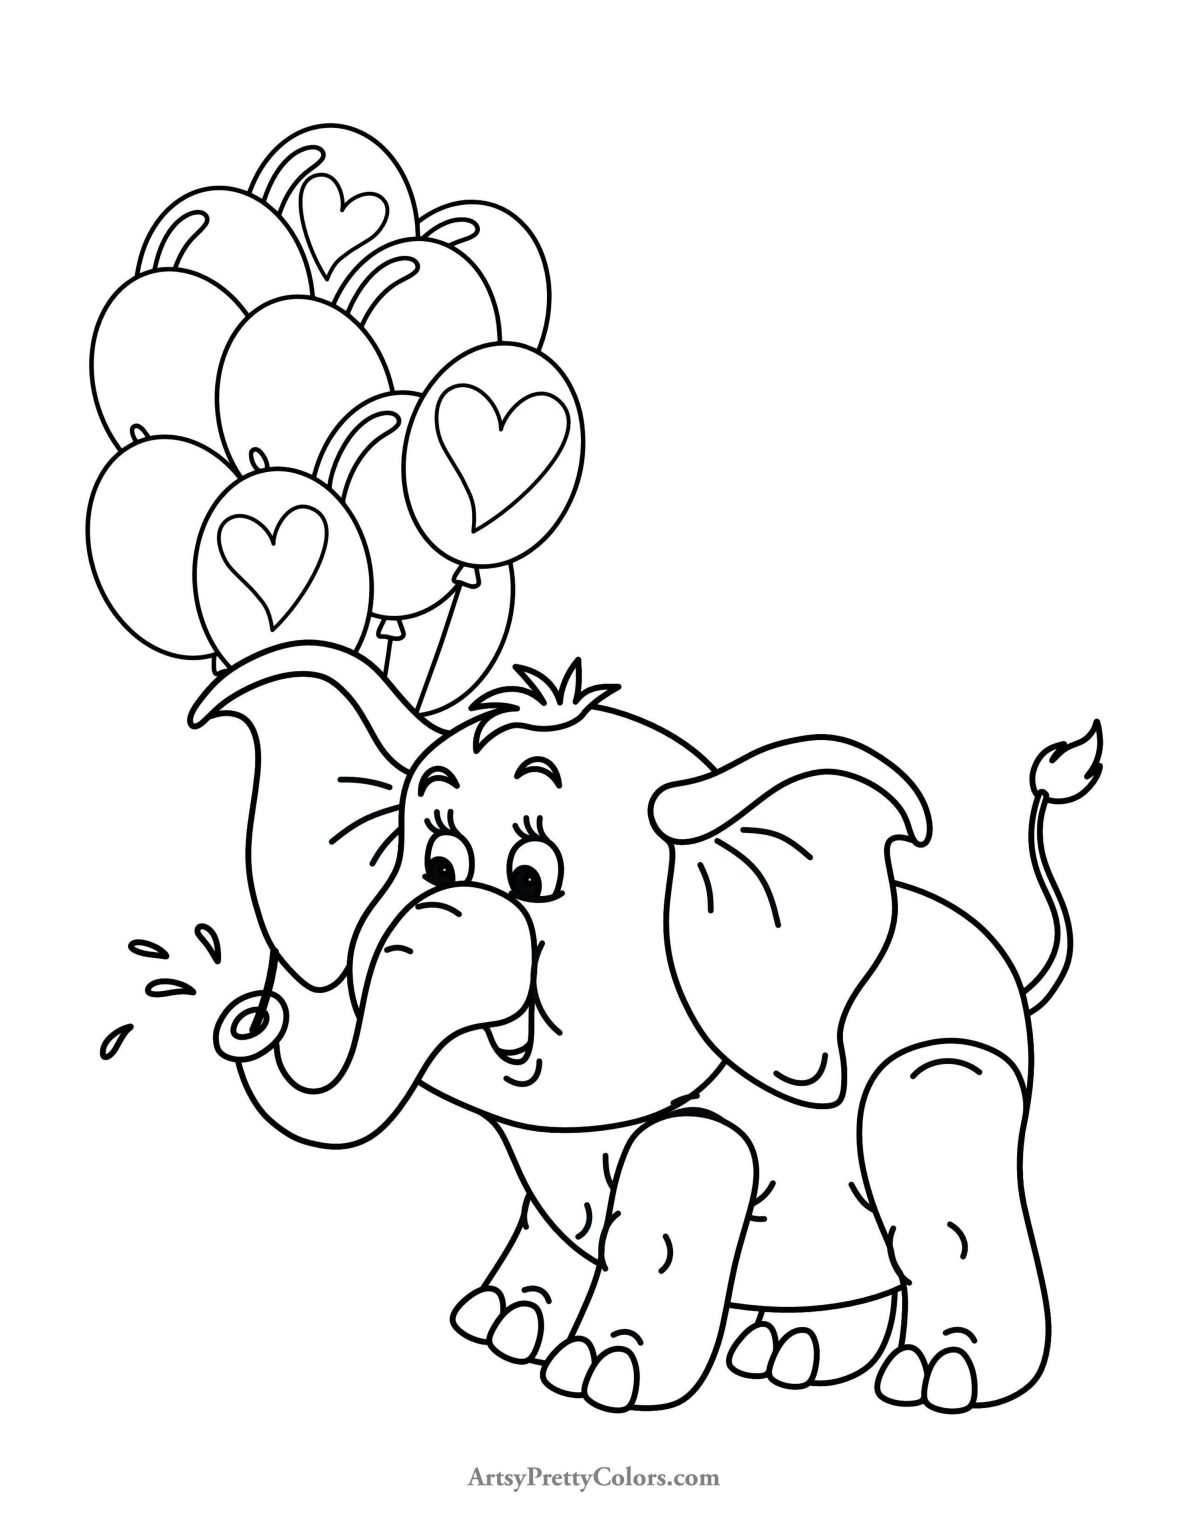 60-valentine-s-day-coloring-pages-for-free-artsy-pretty-plants